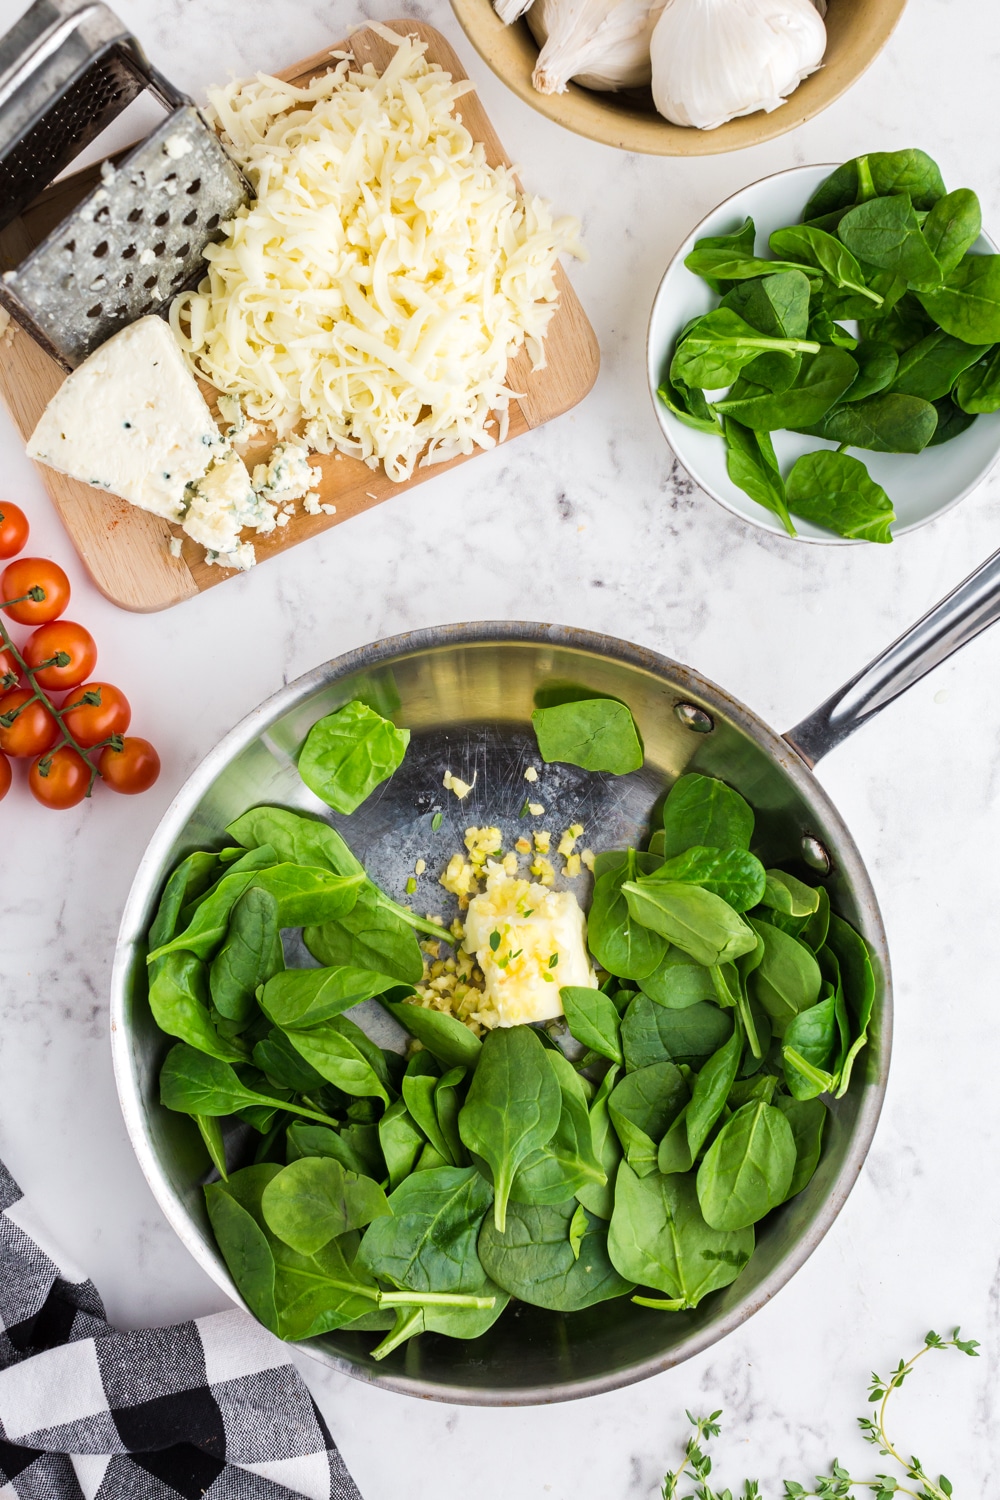 Spinach Garlic and Butter in a Skillet, cheese, grated cheese, grater on a wooden kitchen board, bowl with spinach leaves, cherry tomatoes, black and white checked kitchen towel, bowl of garlic cloves, on marble countertop